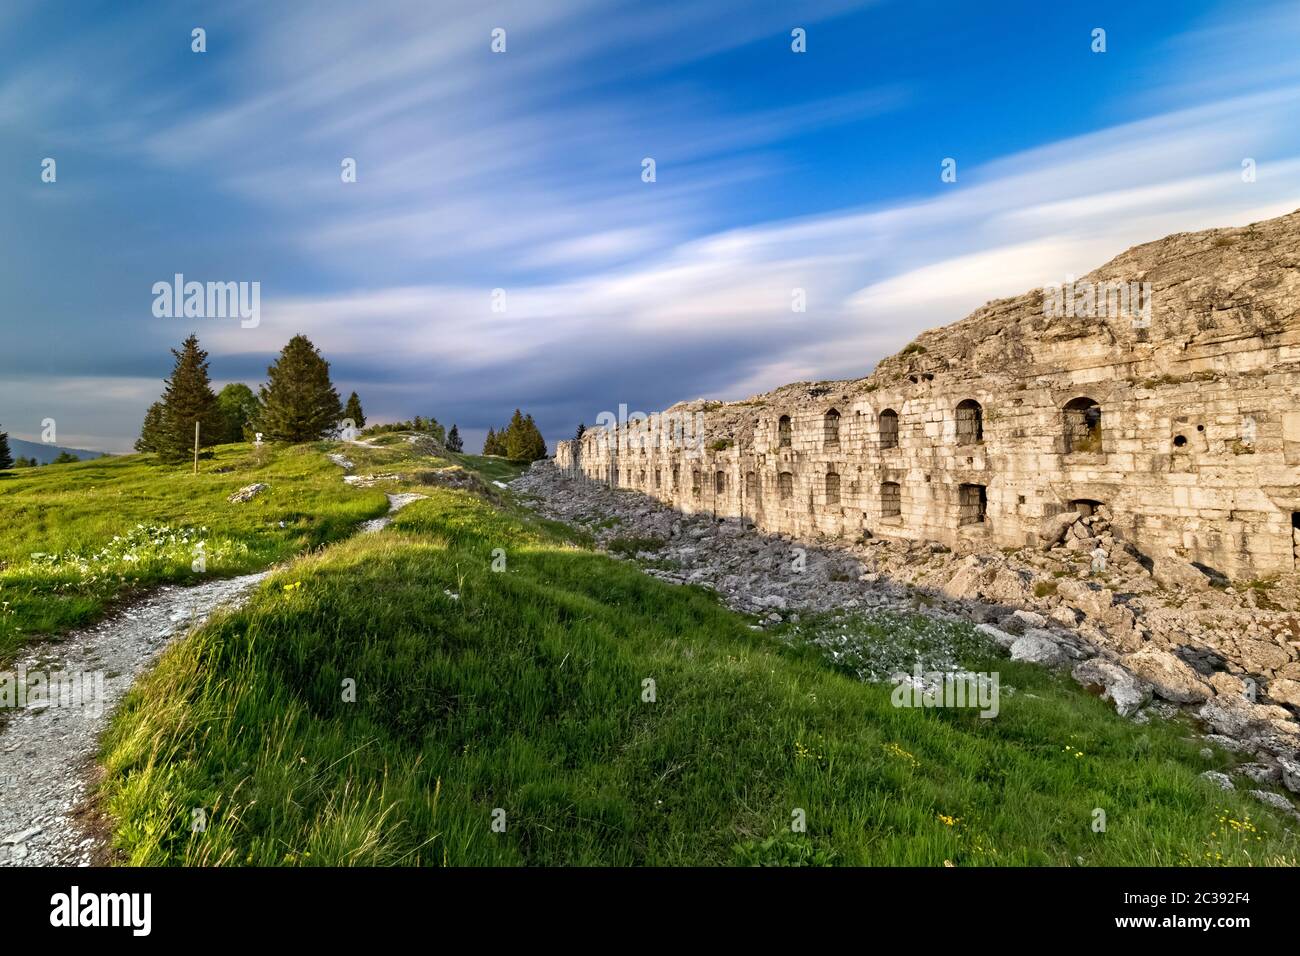 Fort Dosso delle Somme: imposing ruin of the Great War. Folgaria, Trento province, Trentino Alto-Adige, Italy, Europe. Stock Photo